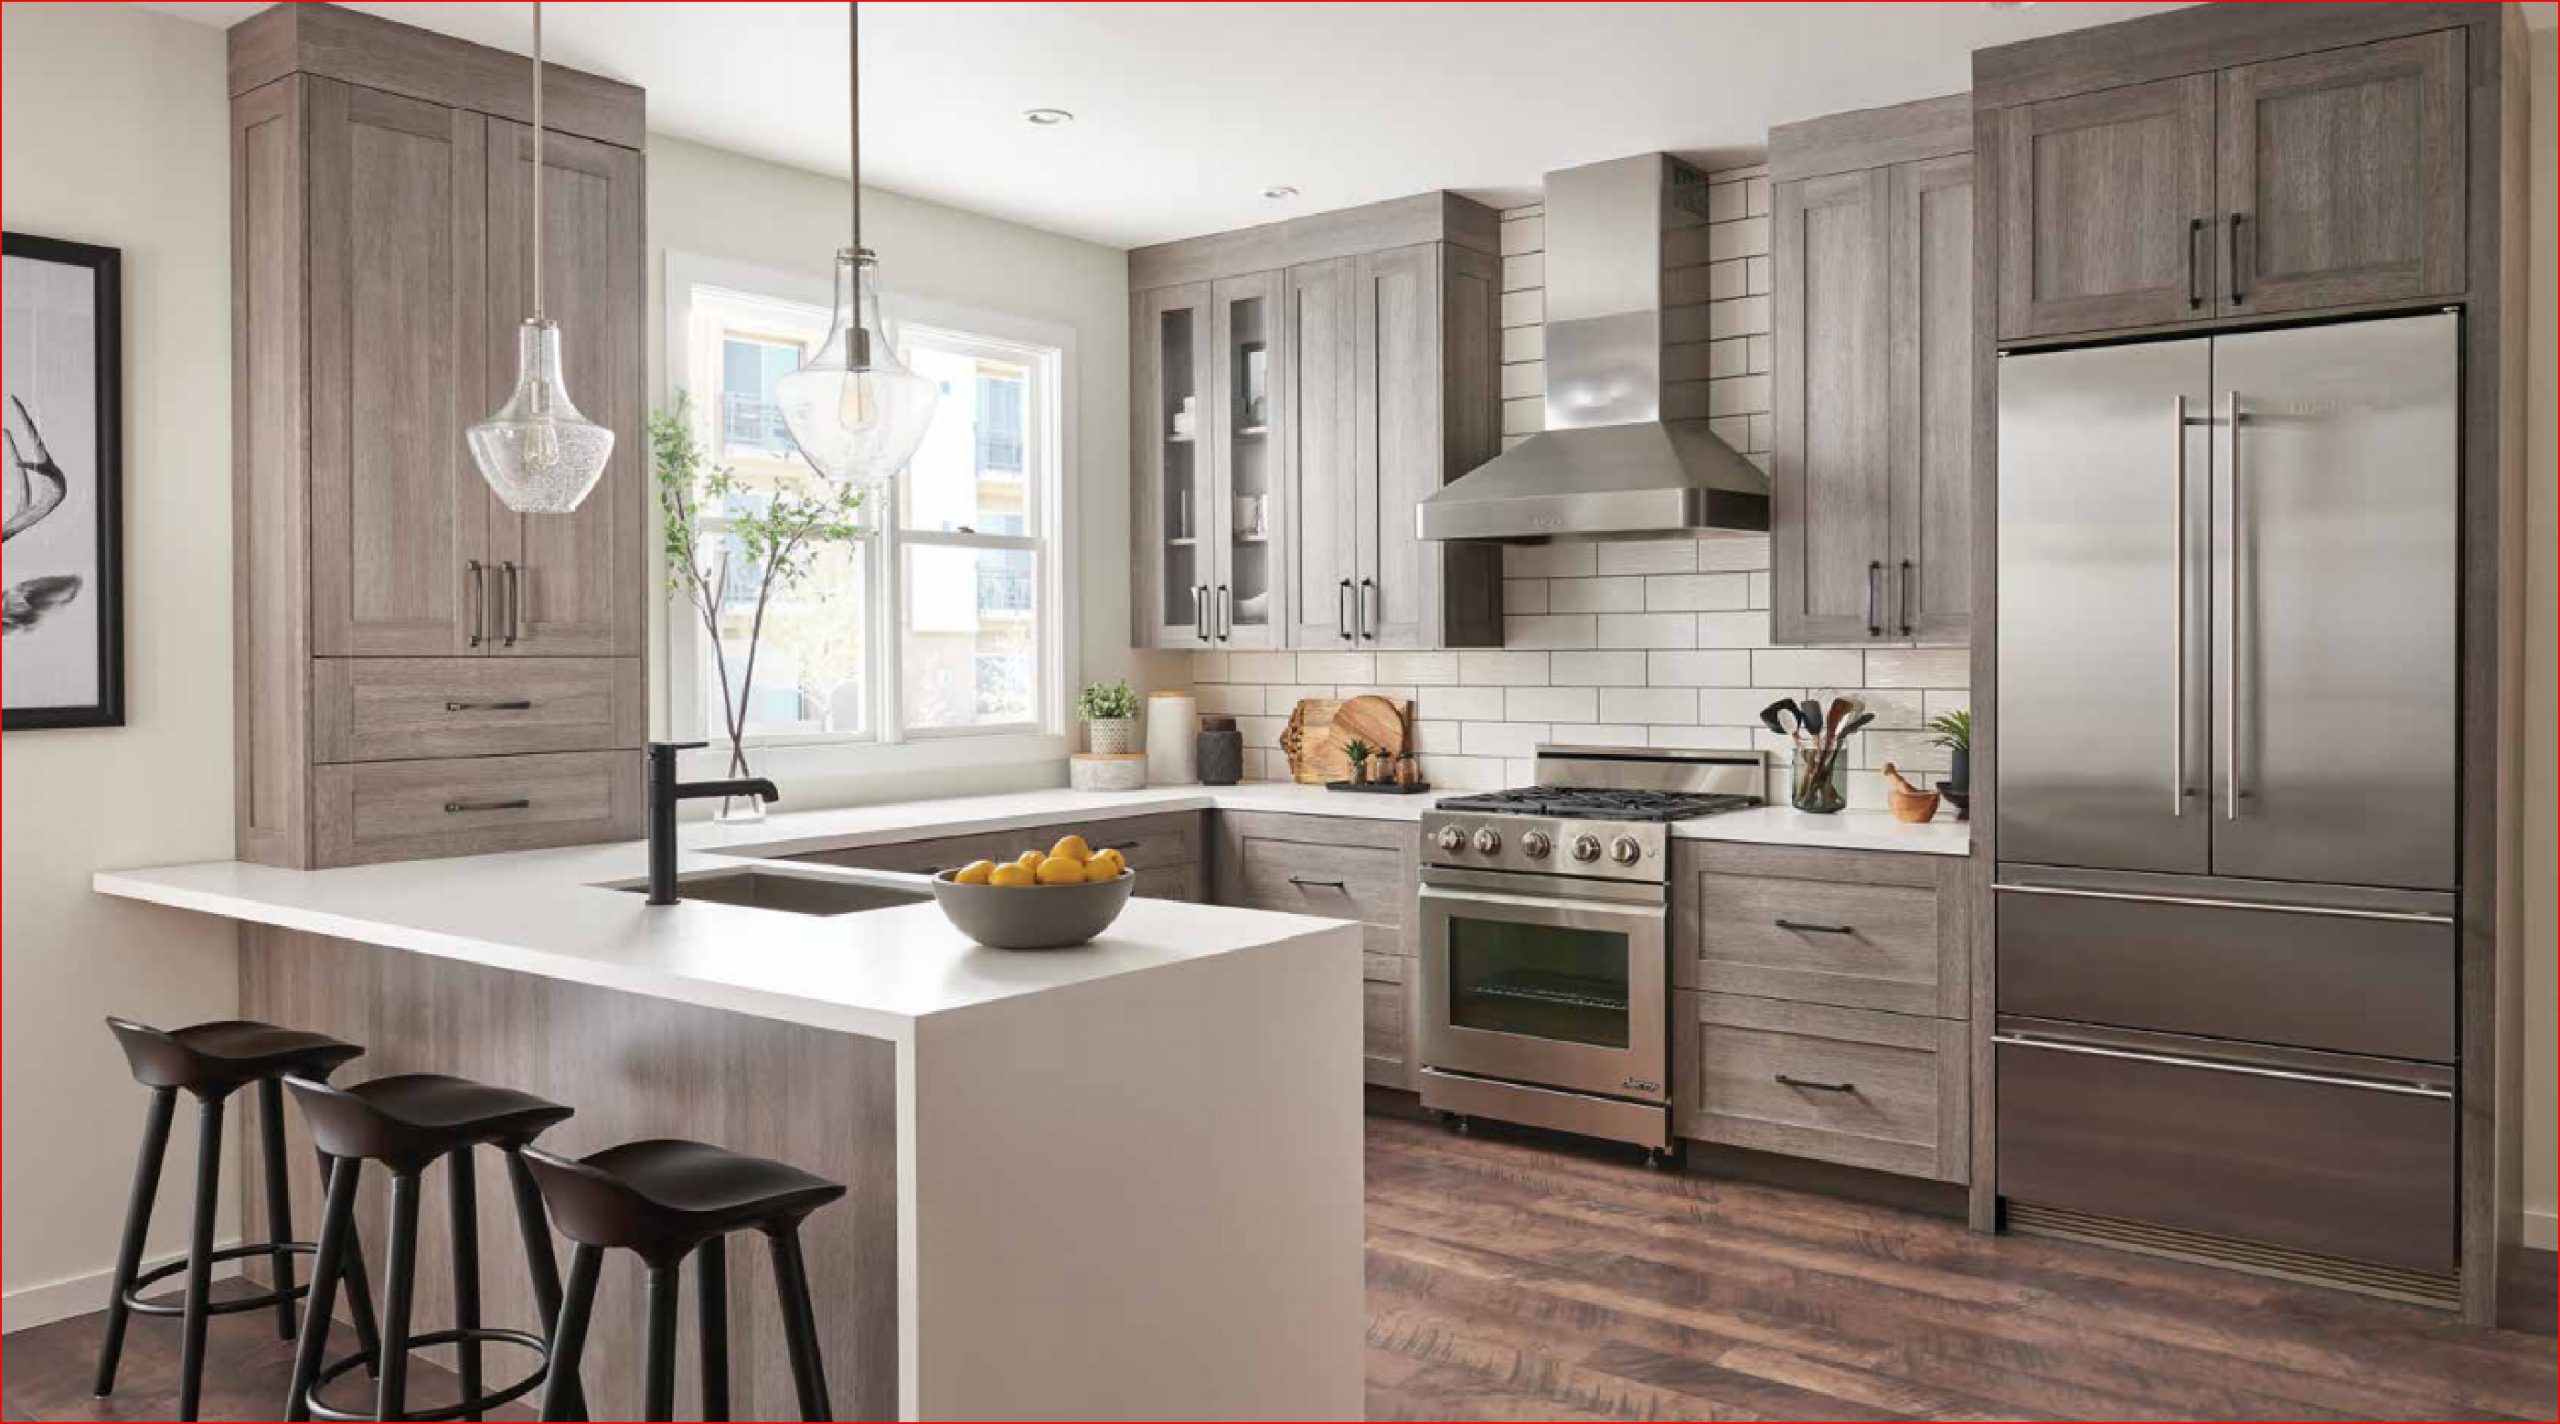 Kitchen Cabinetry scaled